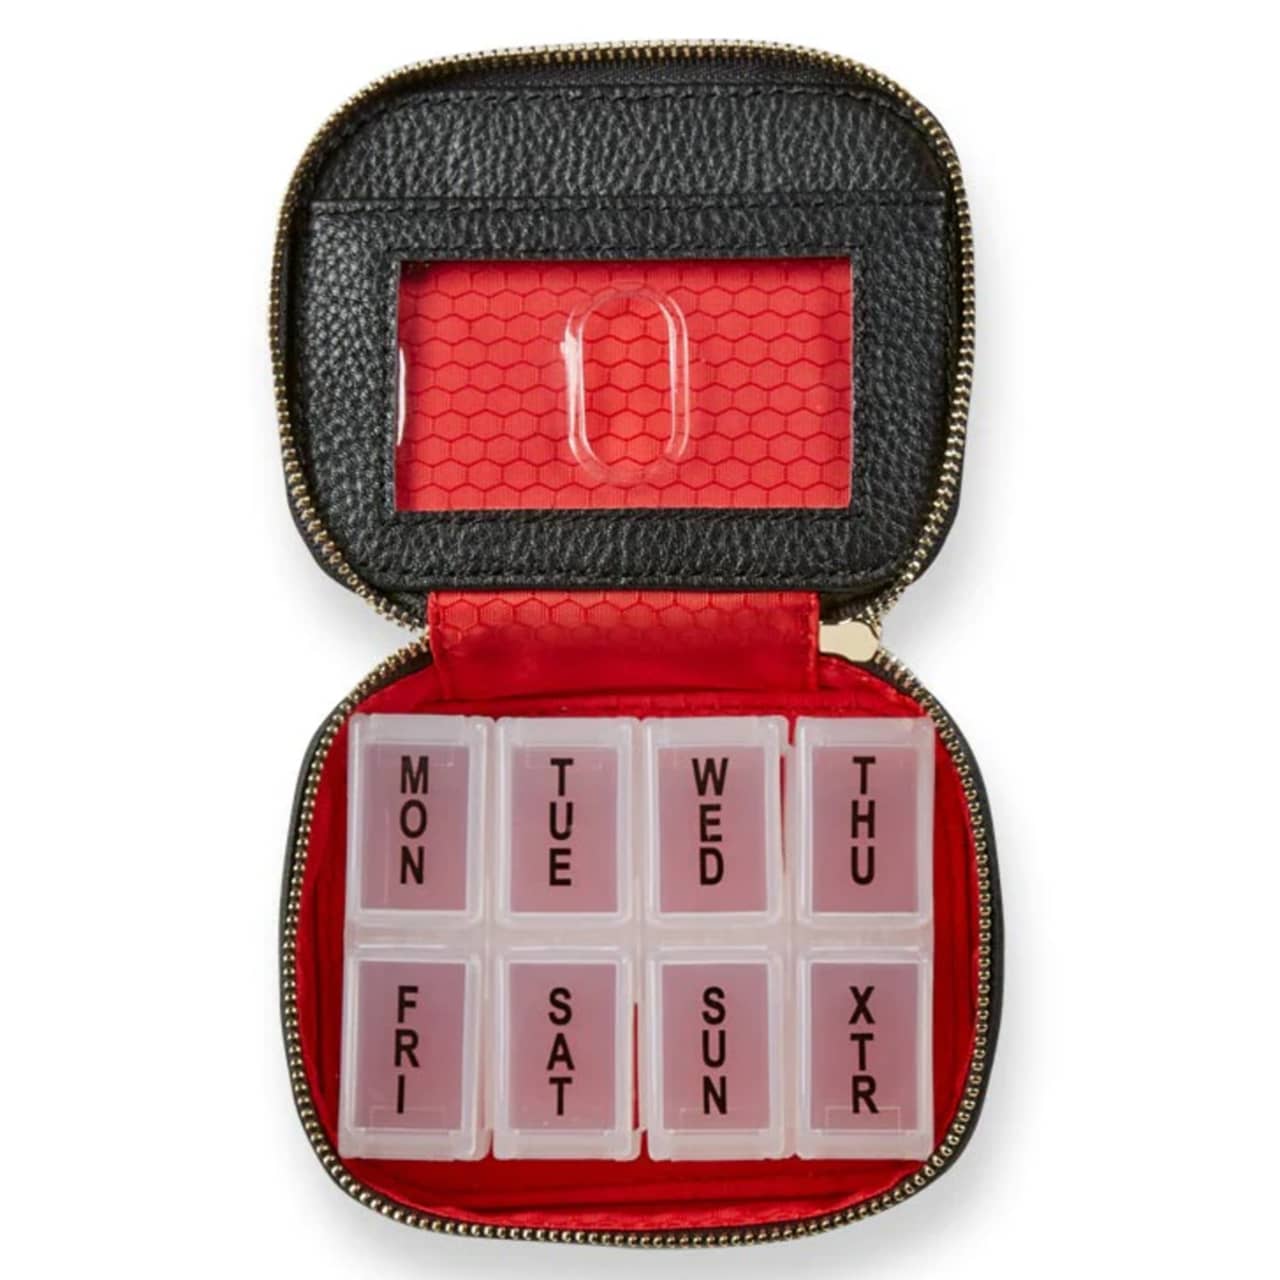 The Best Pill Organizers, Cases and Boxes That Are Stylish and Functional -  Buy Side from WSJ